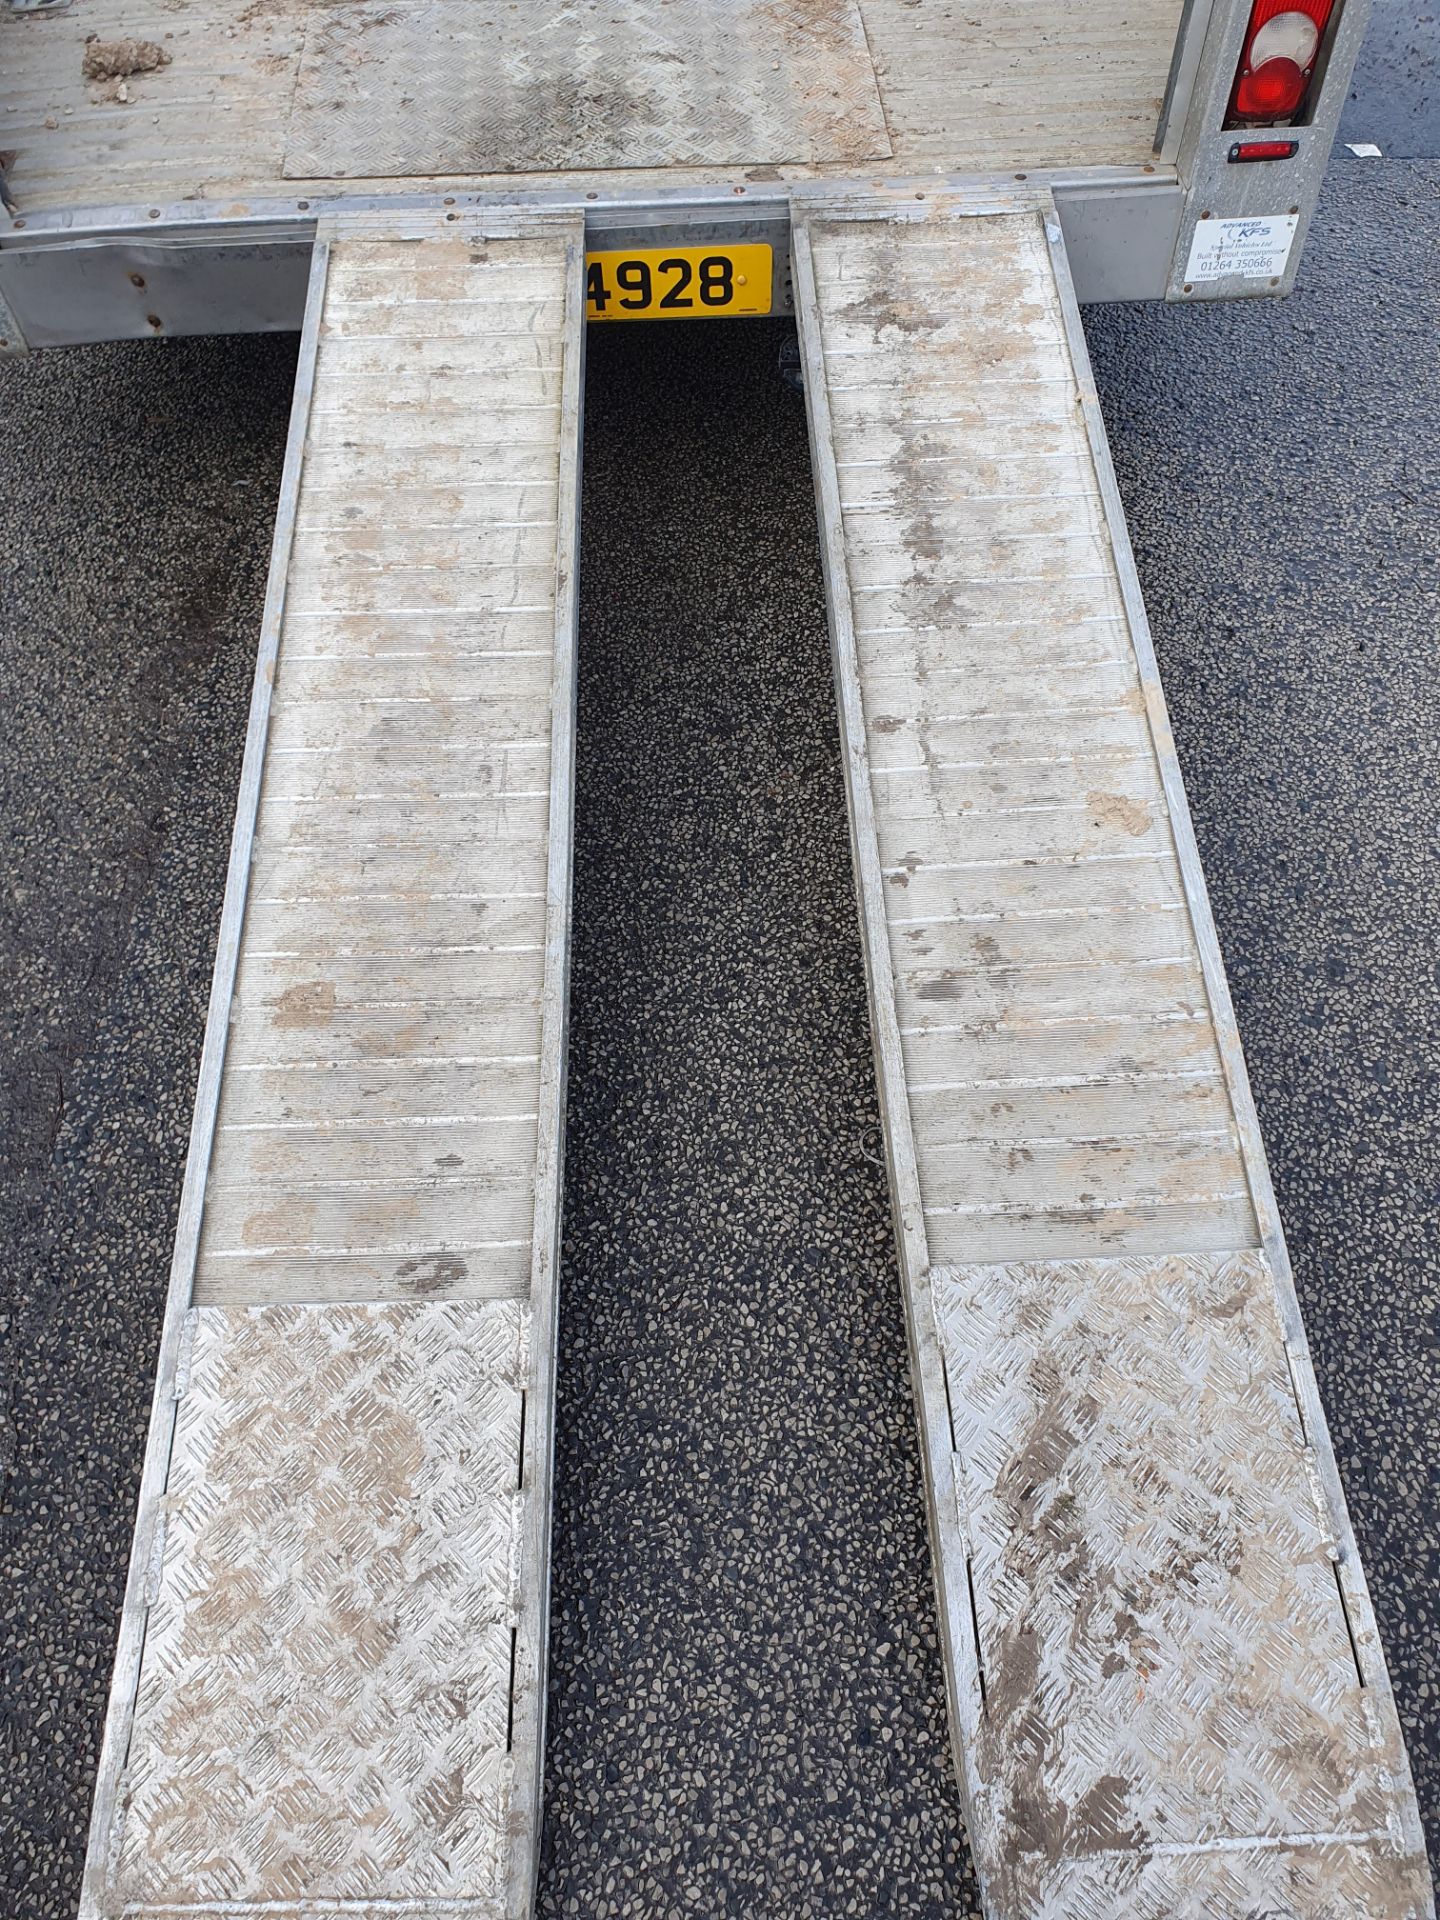 Citroen Relay X2-50 Flat Lorry w/ Loading Ramp Sides | DIG 4928 | 148,060 Miles - Image 13 of 20